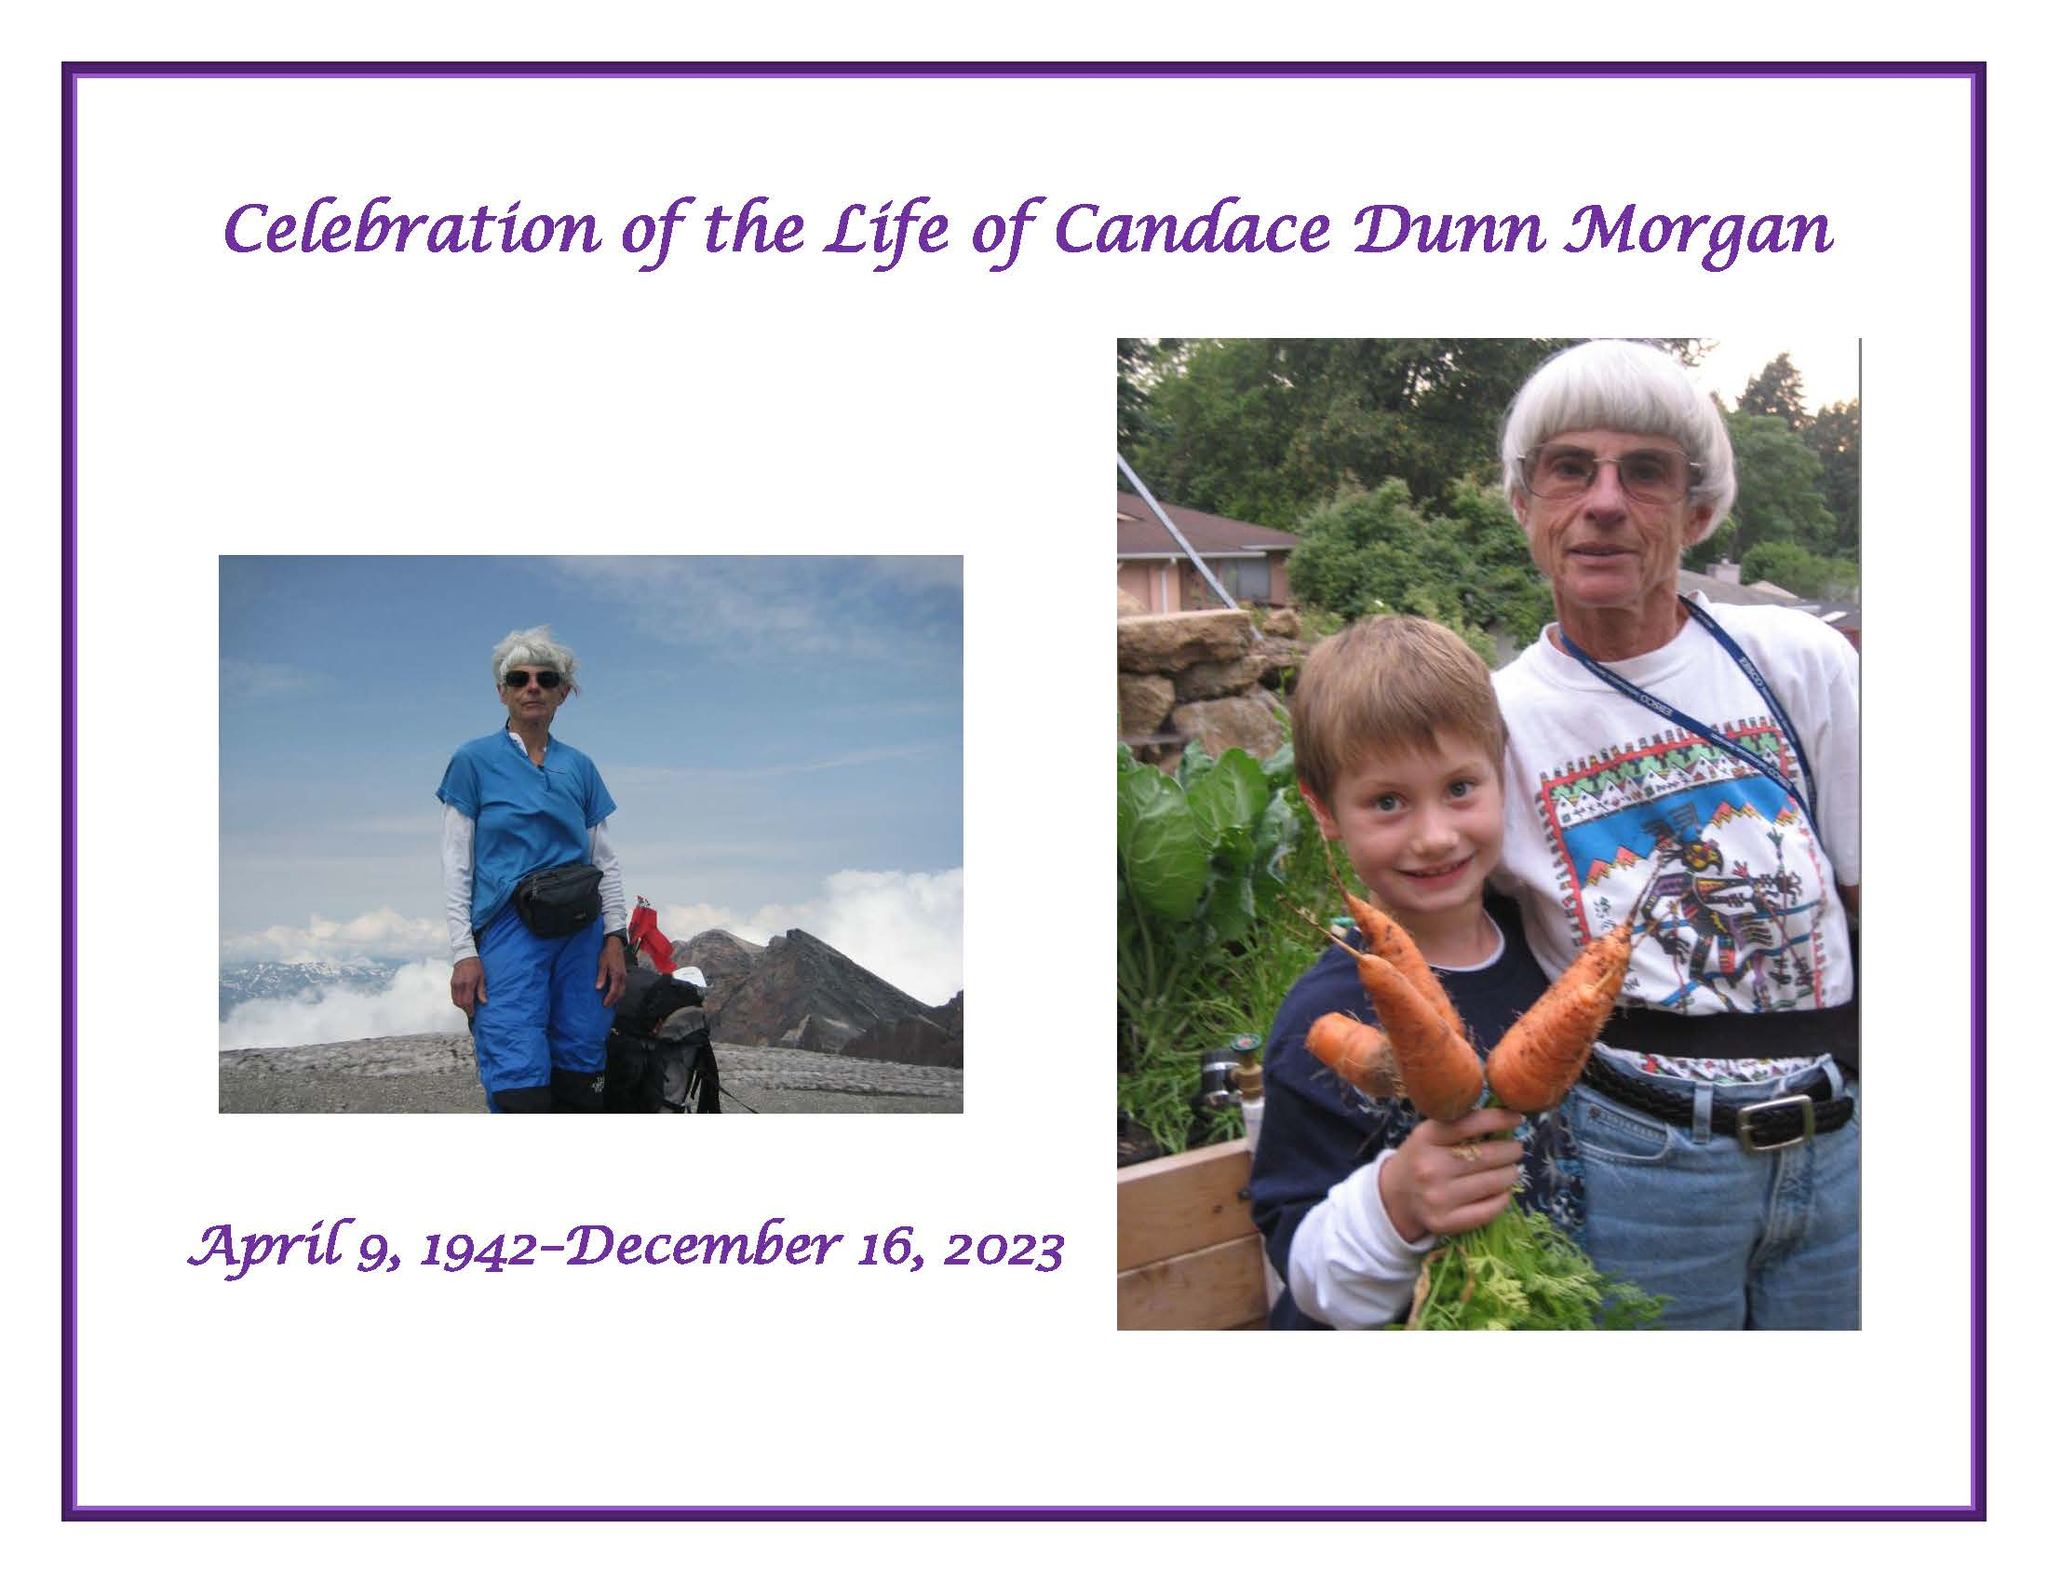 Celebration of life of Candy Morgan